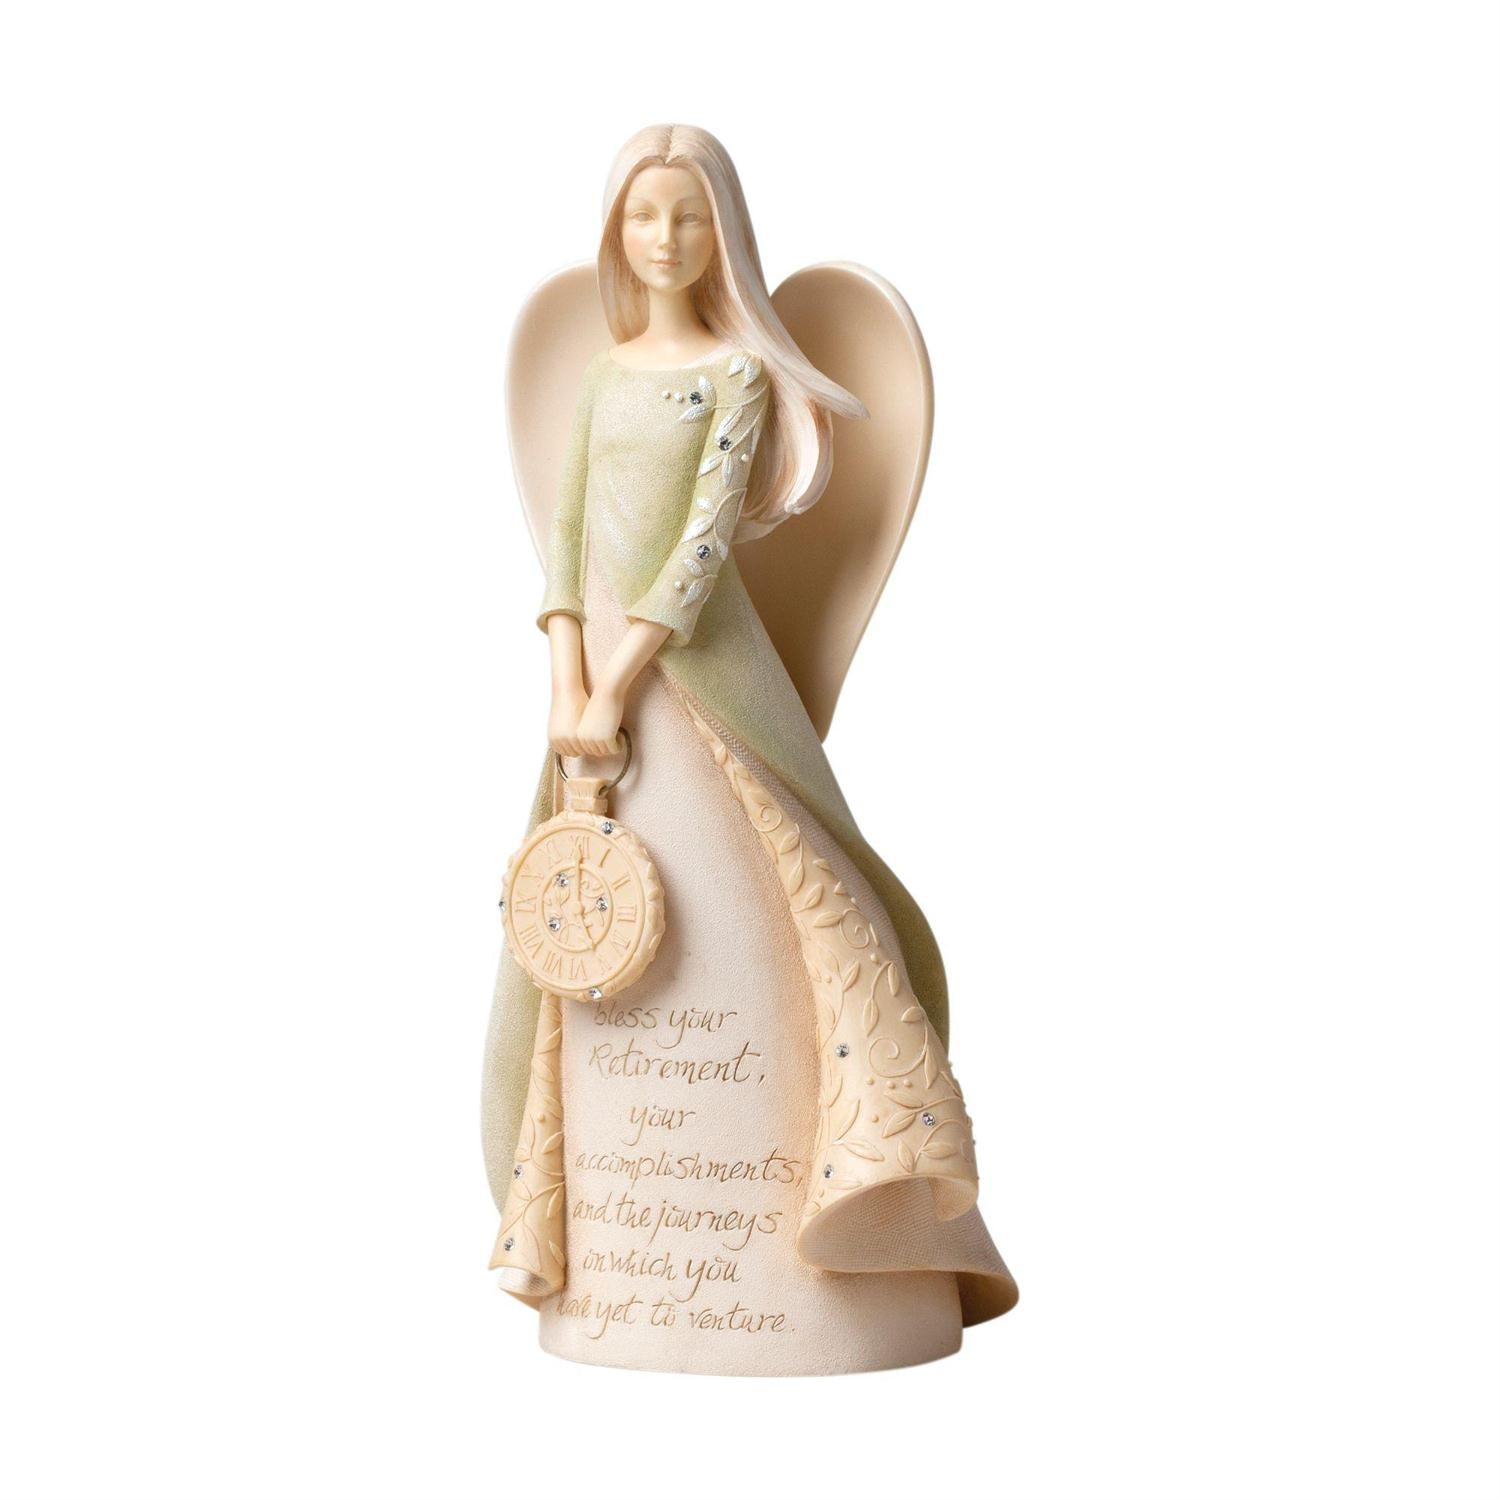 Retirement Blessings Angel 9.5 inches tall with "Bless your retirement, your accomplishments, and the journeys on which you have yet to venture" message. Enesco's Simply Inspired Angels Collection.